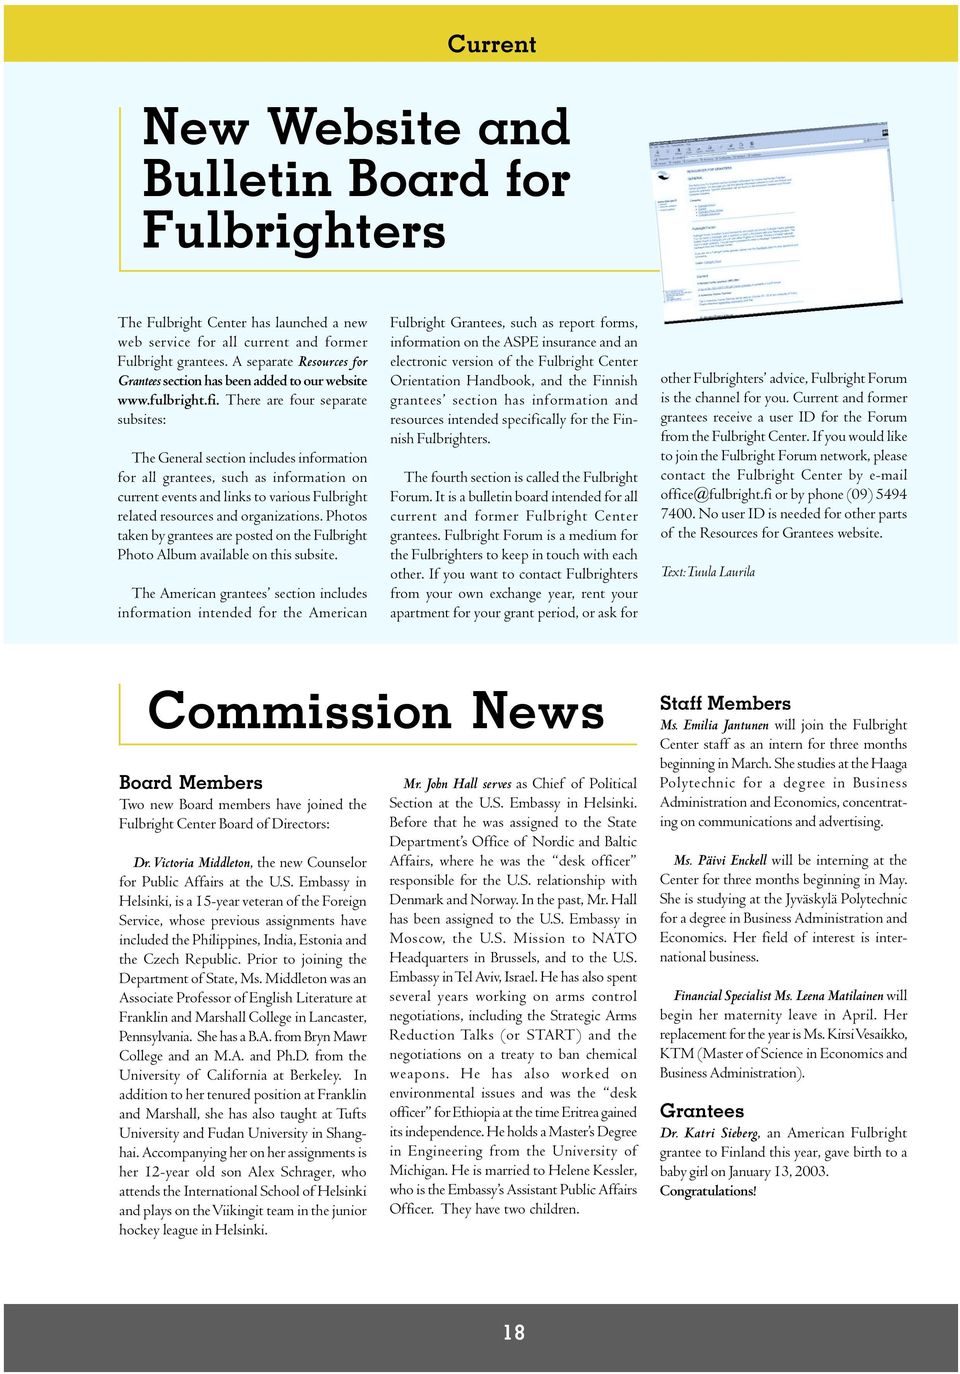 There are four separate subsites: The General section includes information for all grantees, such as information on current events and links to various Fulbright related resources and organizations.